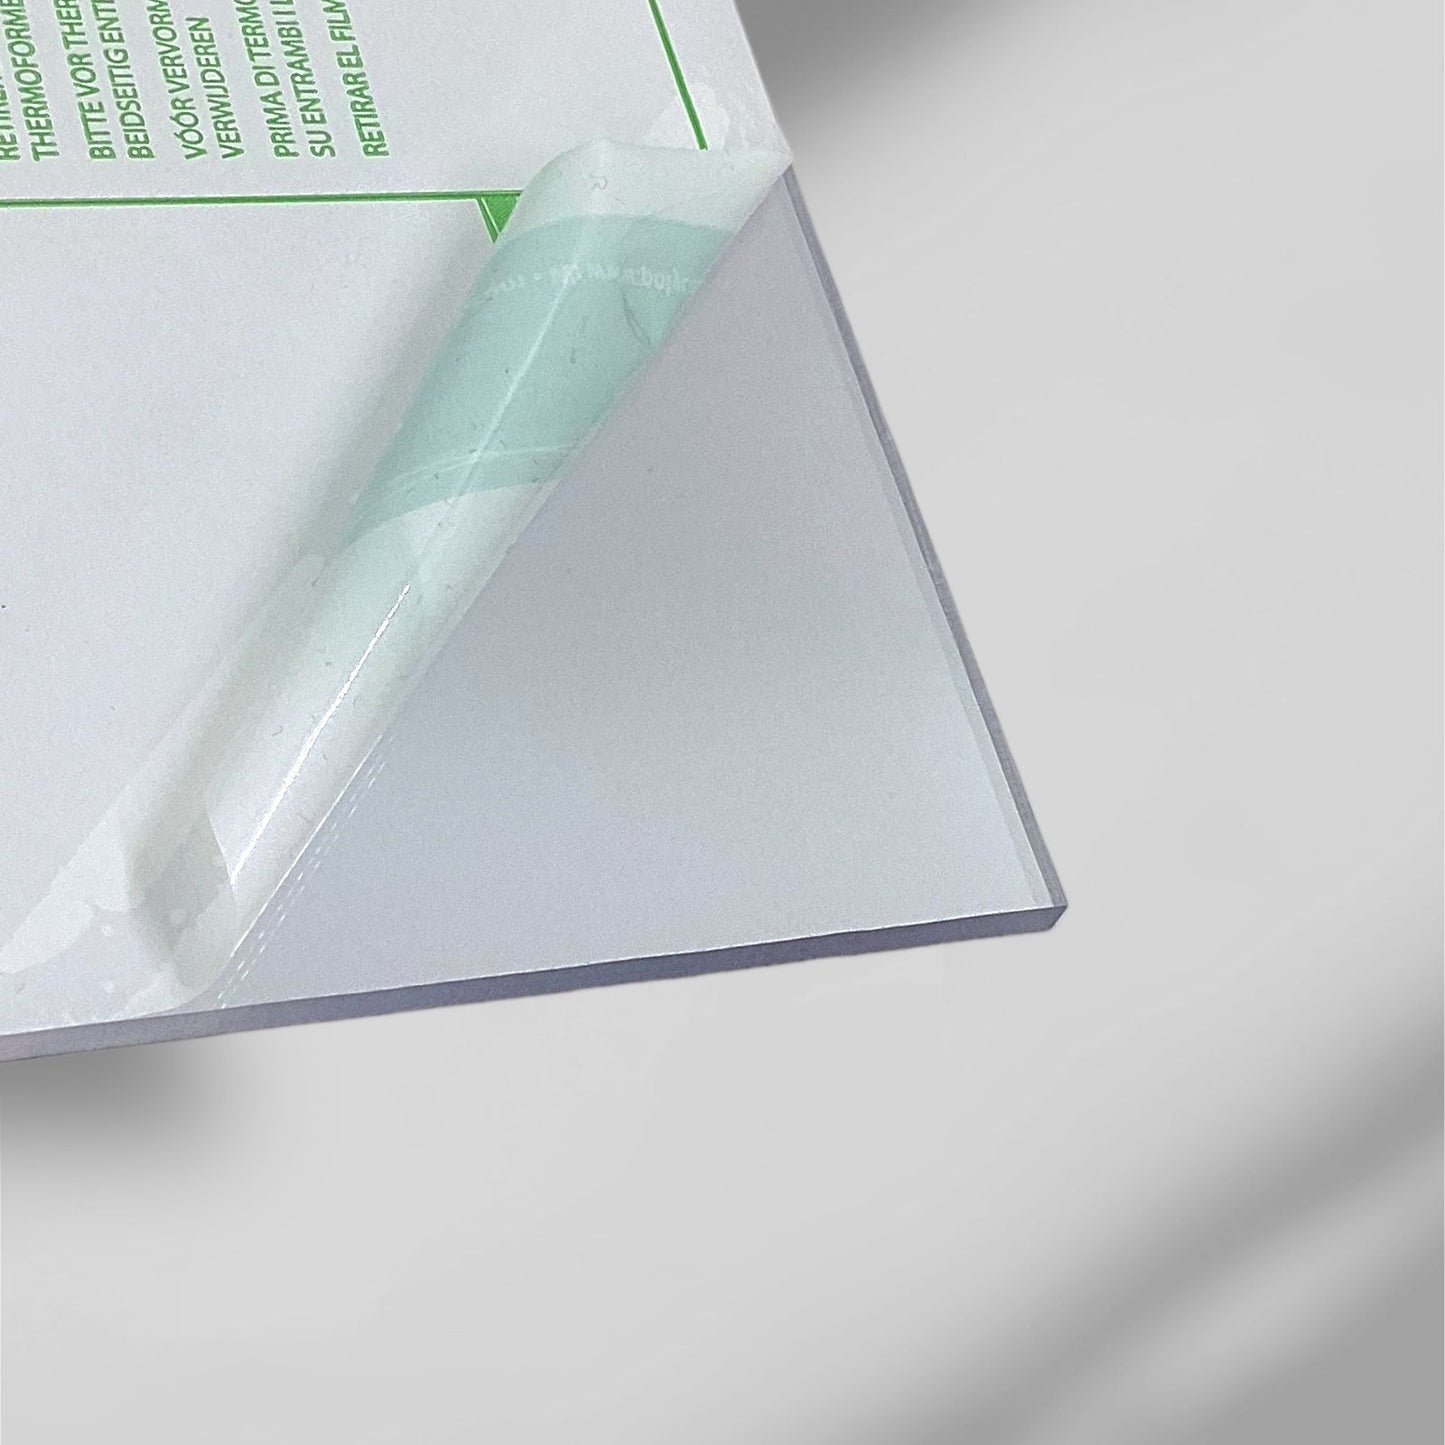 3/8" Clear Polycarbonate Sheet